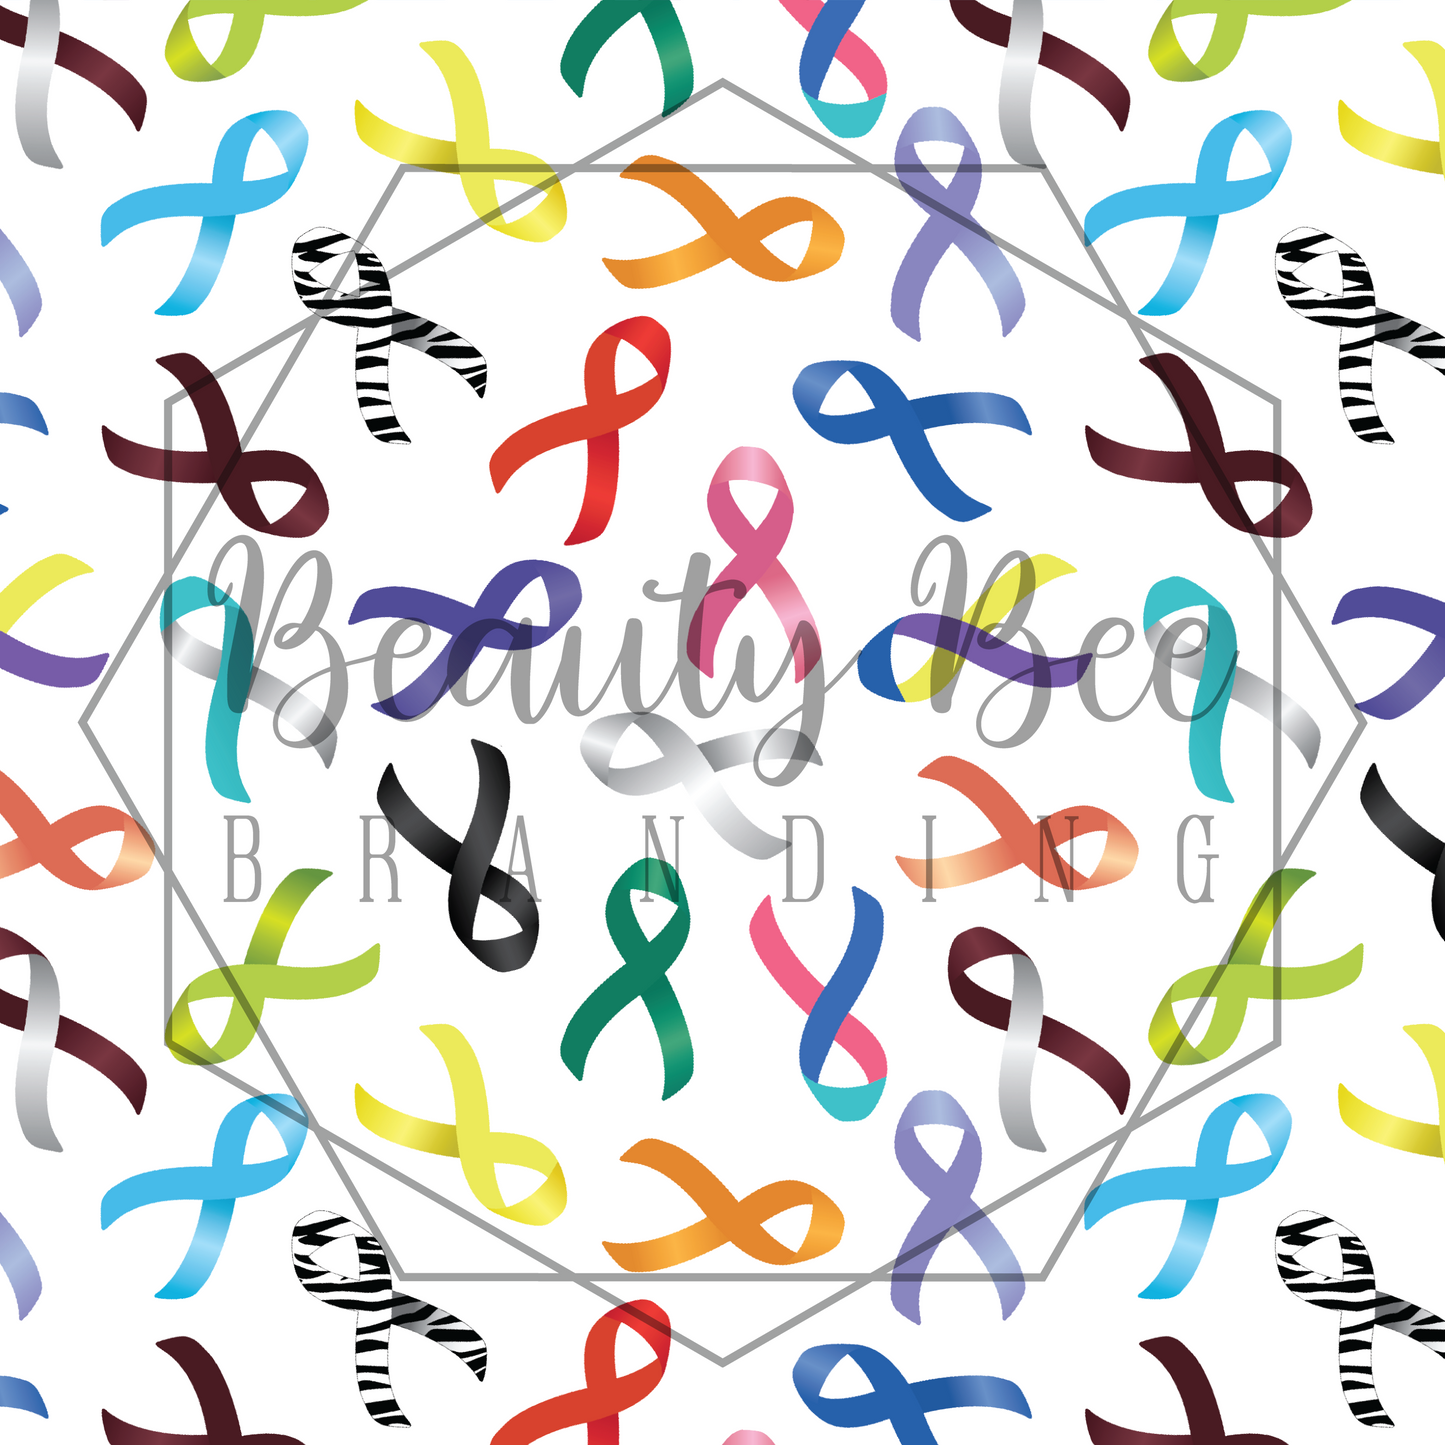 Cancer Ribbons SEAMLESS PATTERN